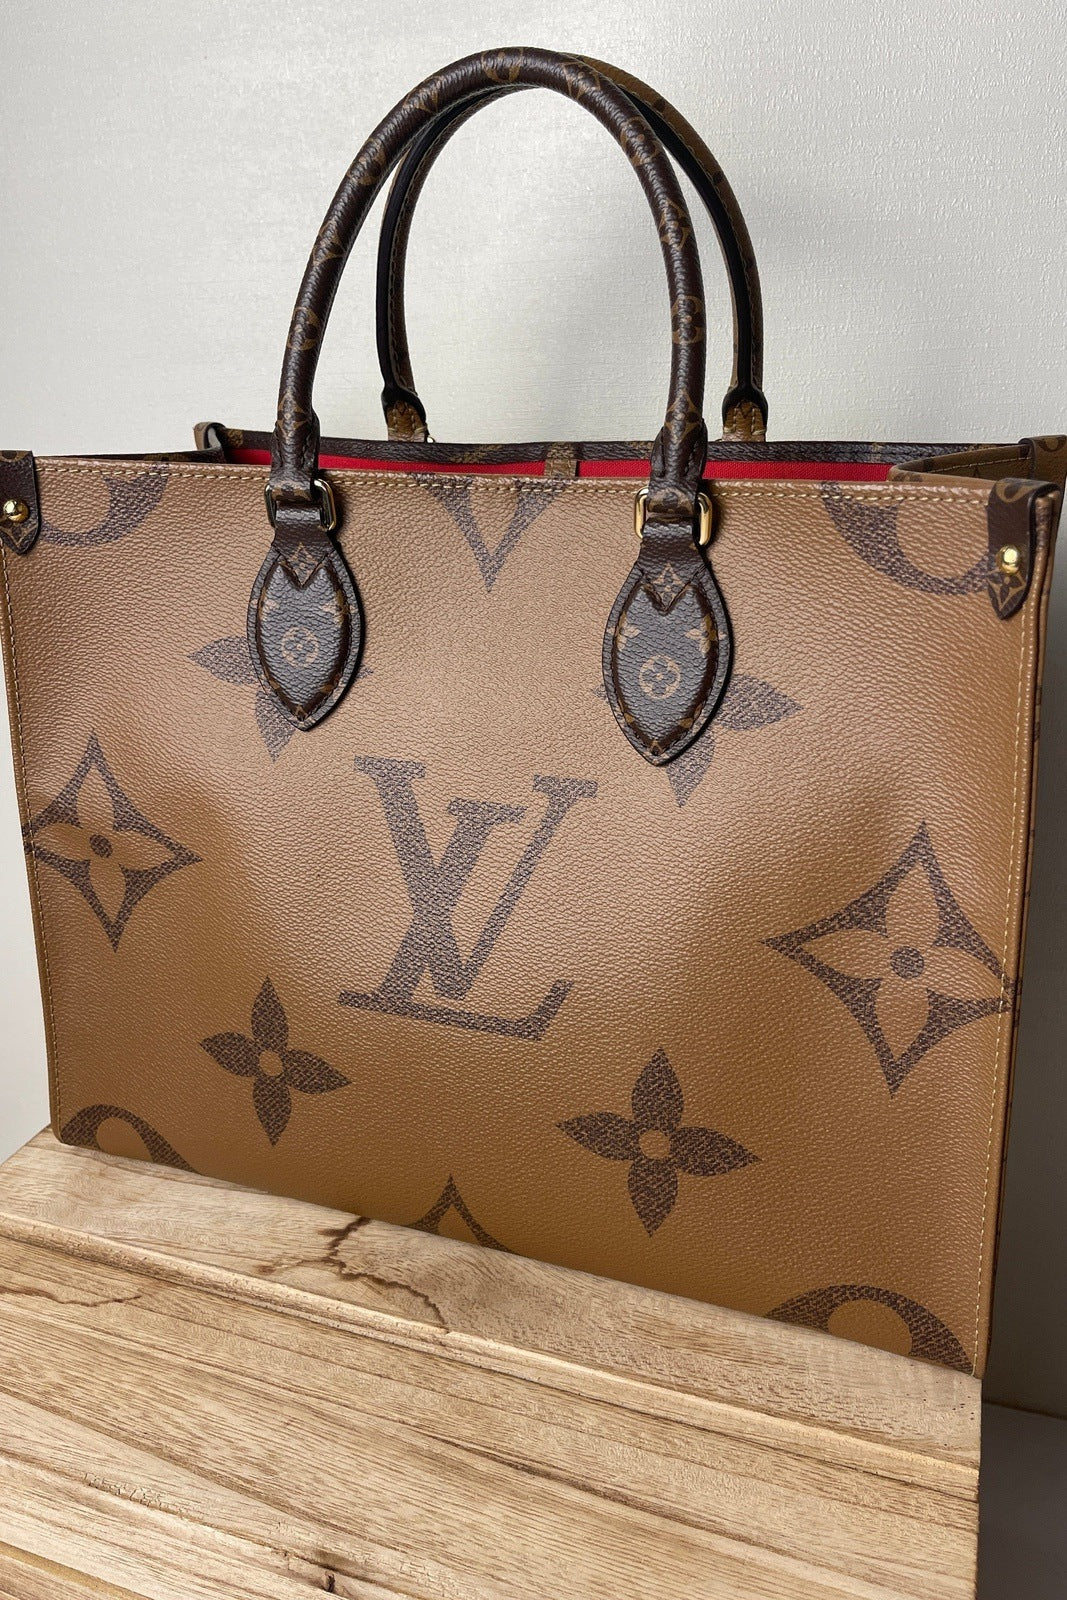 Louis Vuitton - Noé – The Reluxed Collection